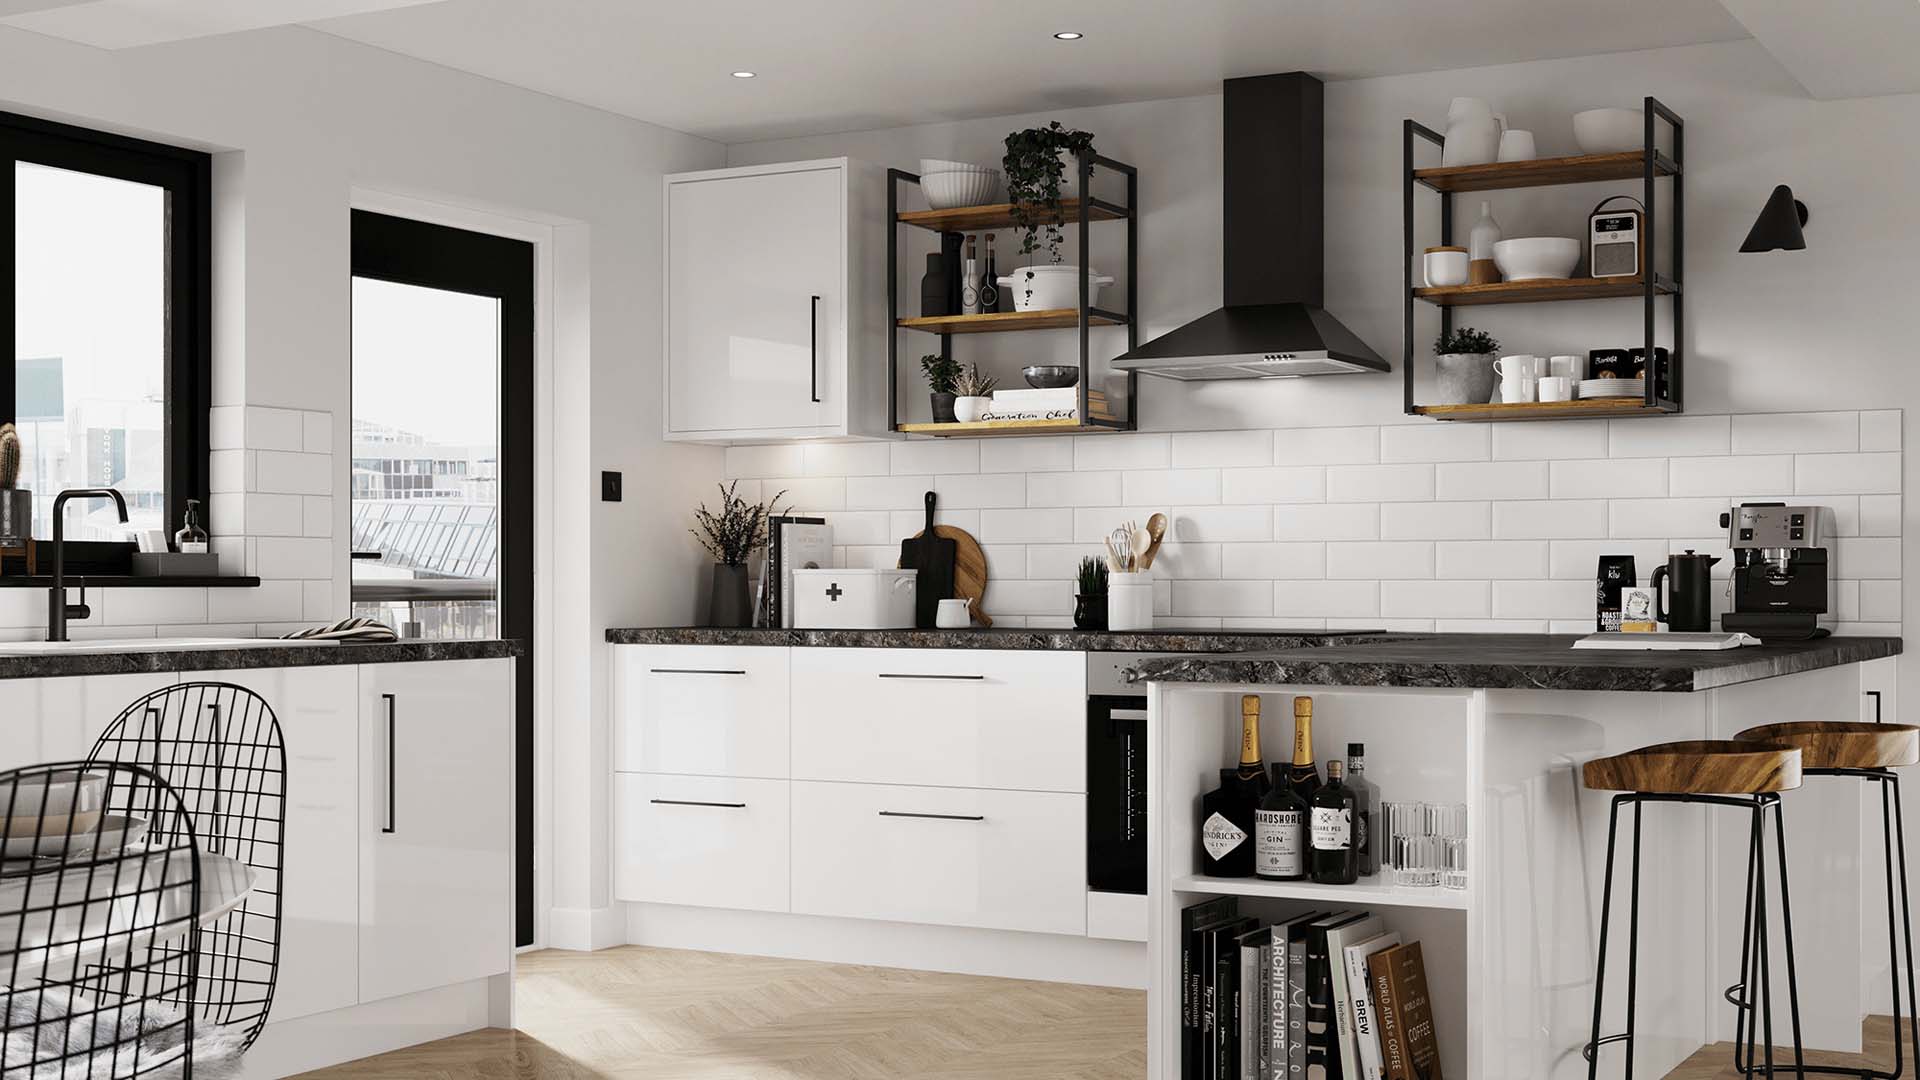 Image of a modern home kitchen